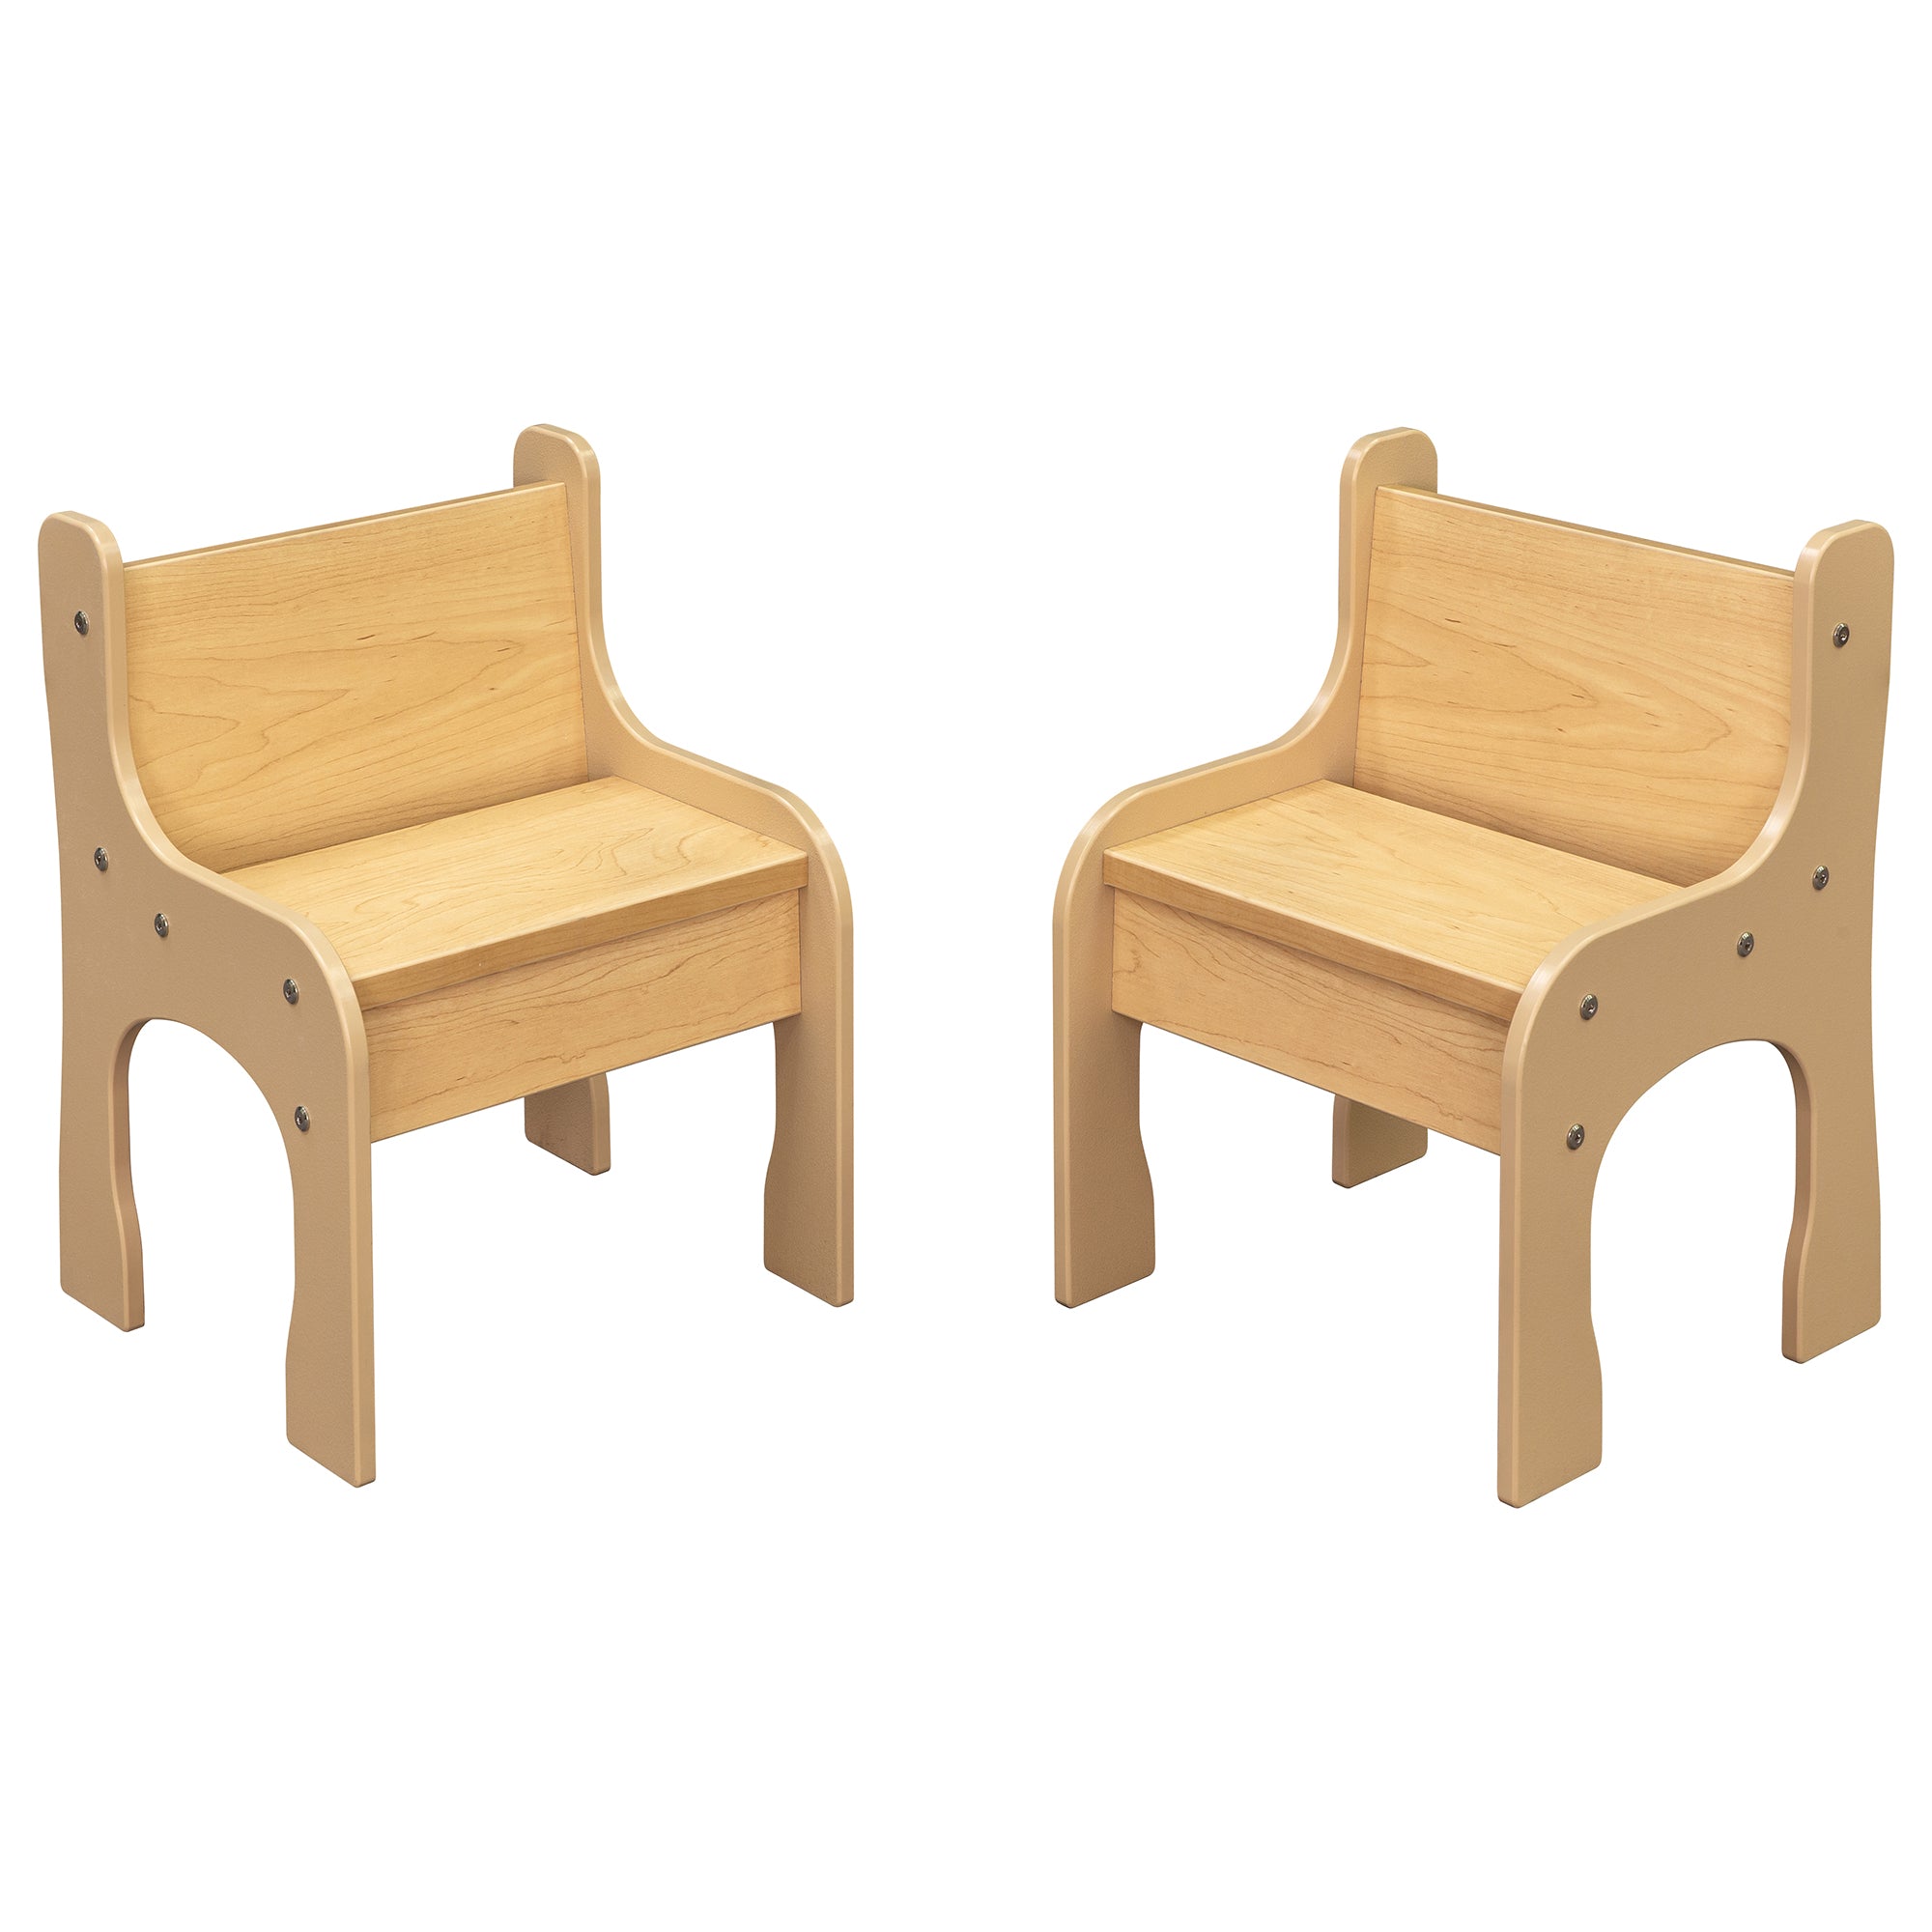 A pair of maple wood, child size chairs.